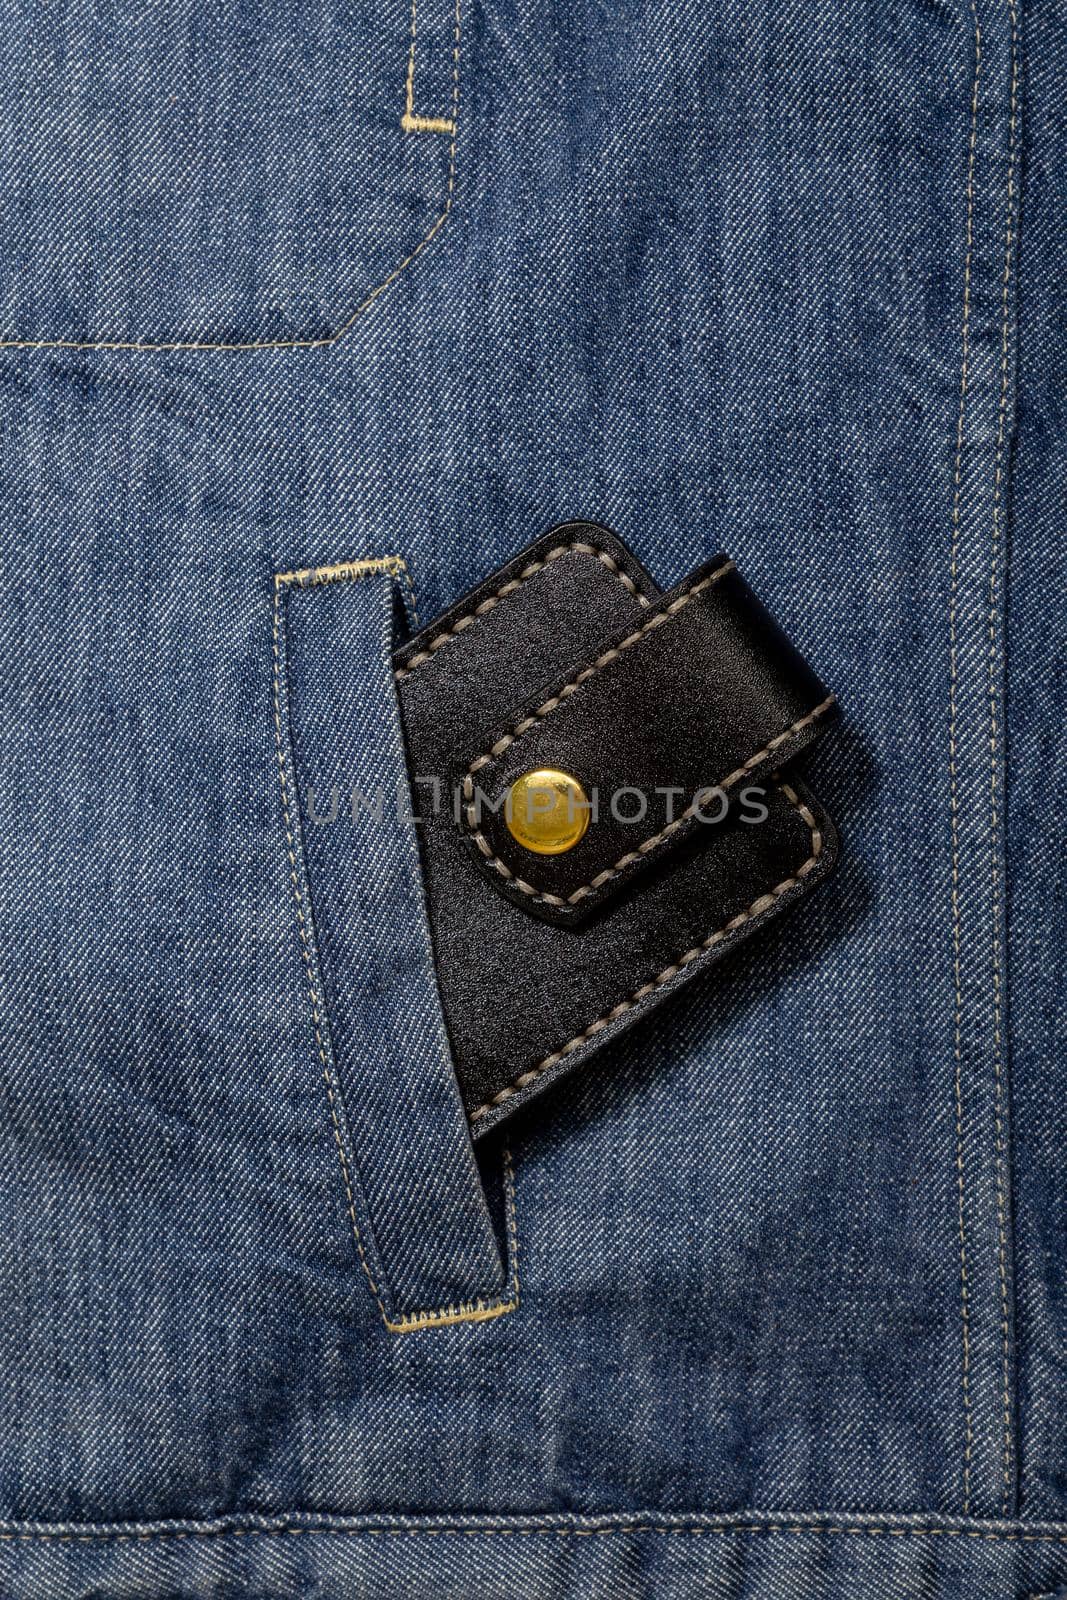 Luxury craft business card holder case made of leather. Black Leather box for cards in a pocket of jeans jacket.